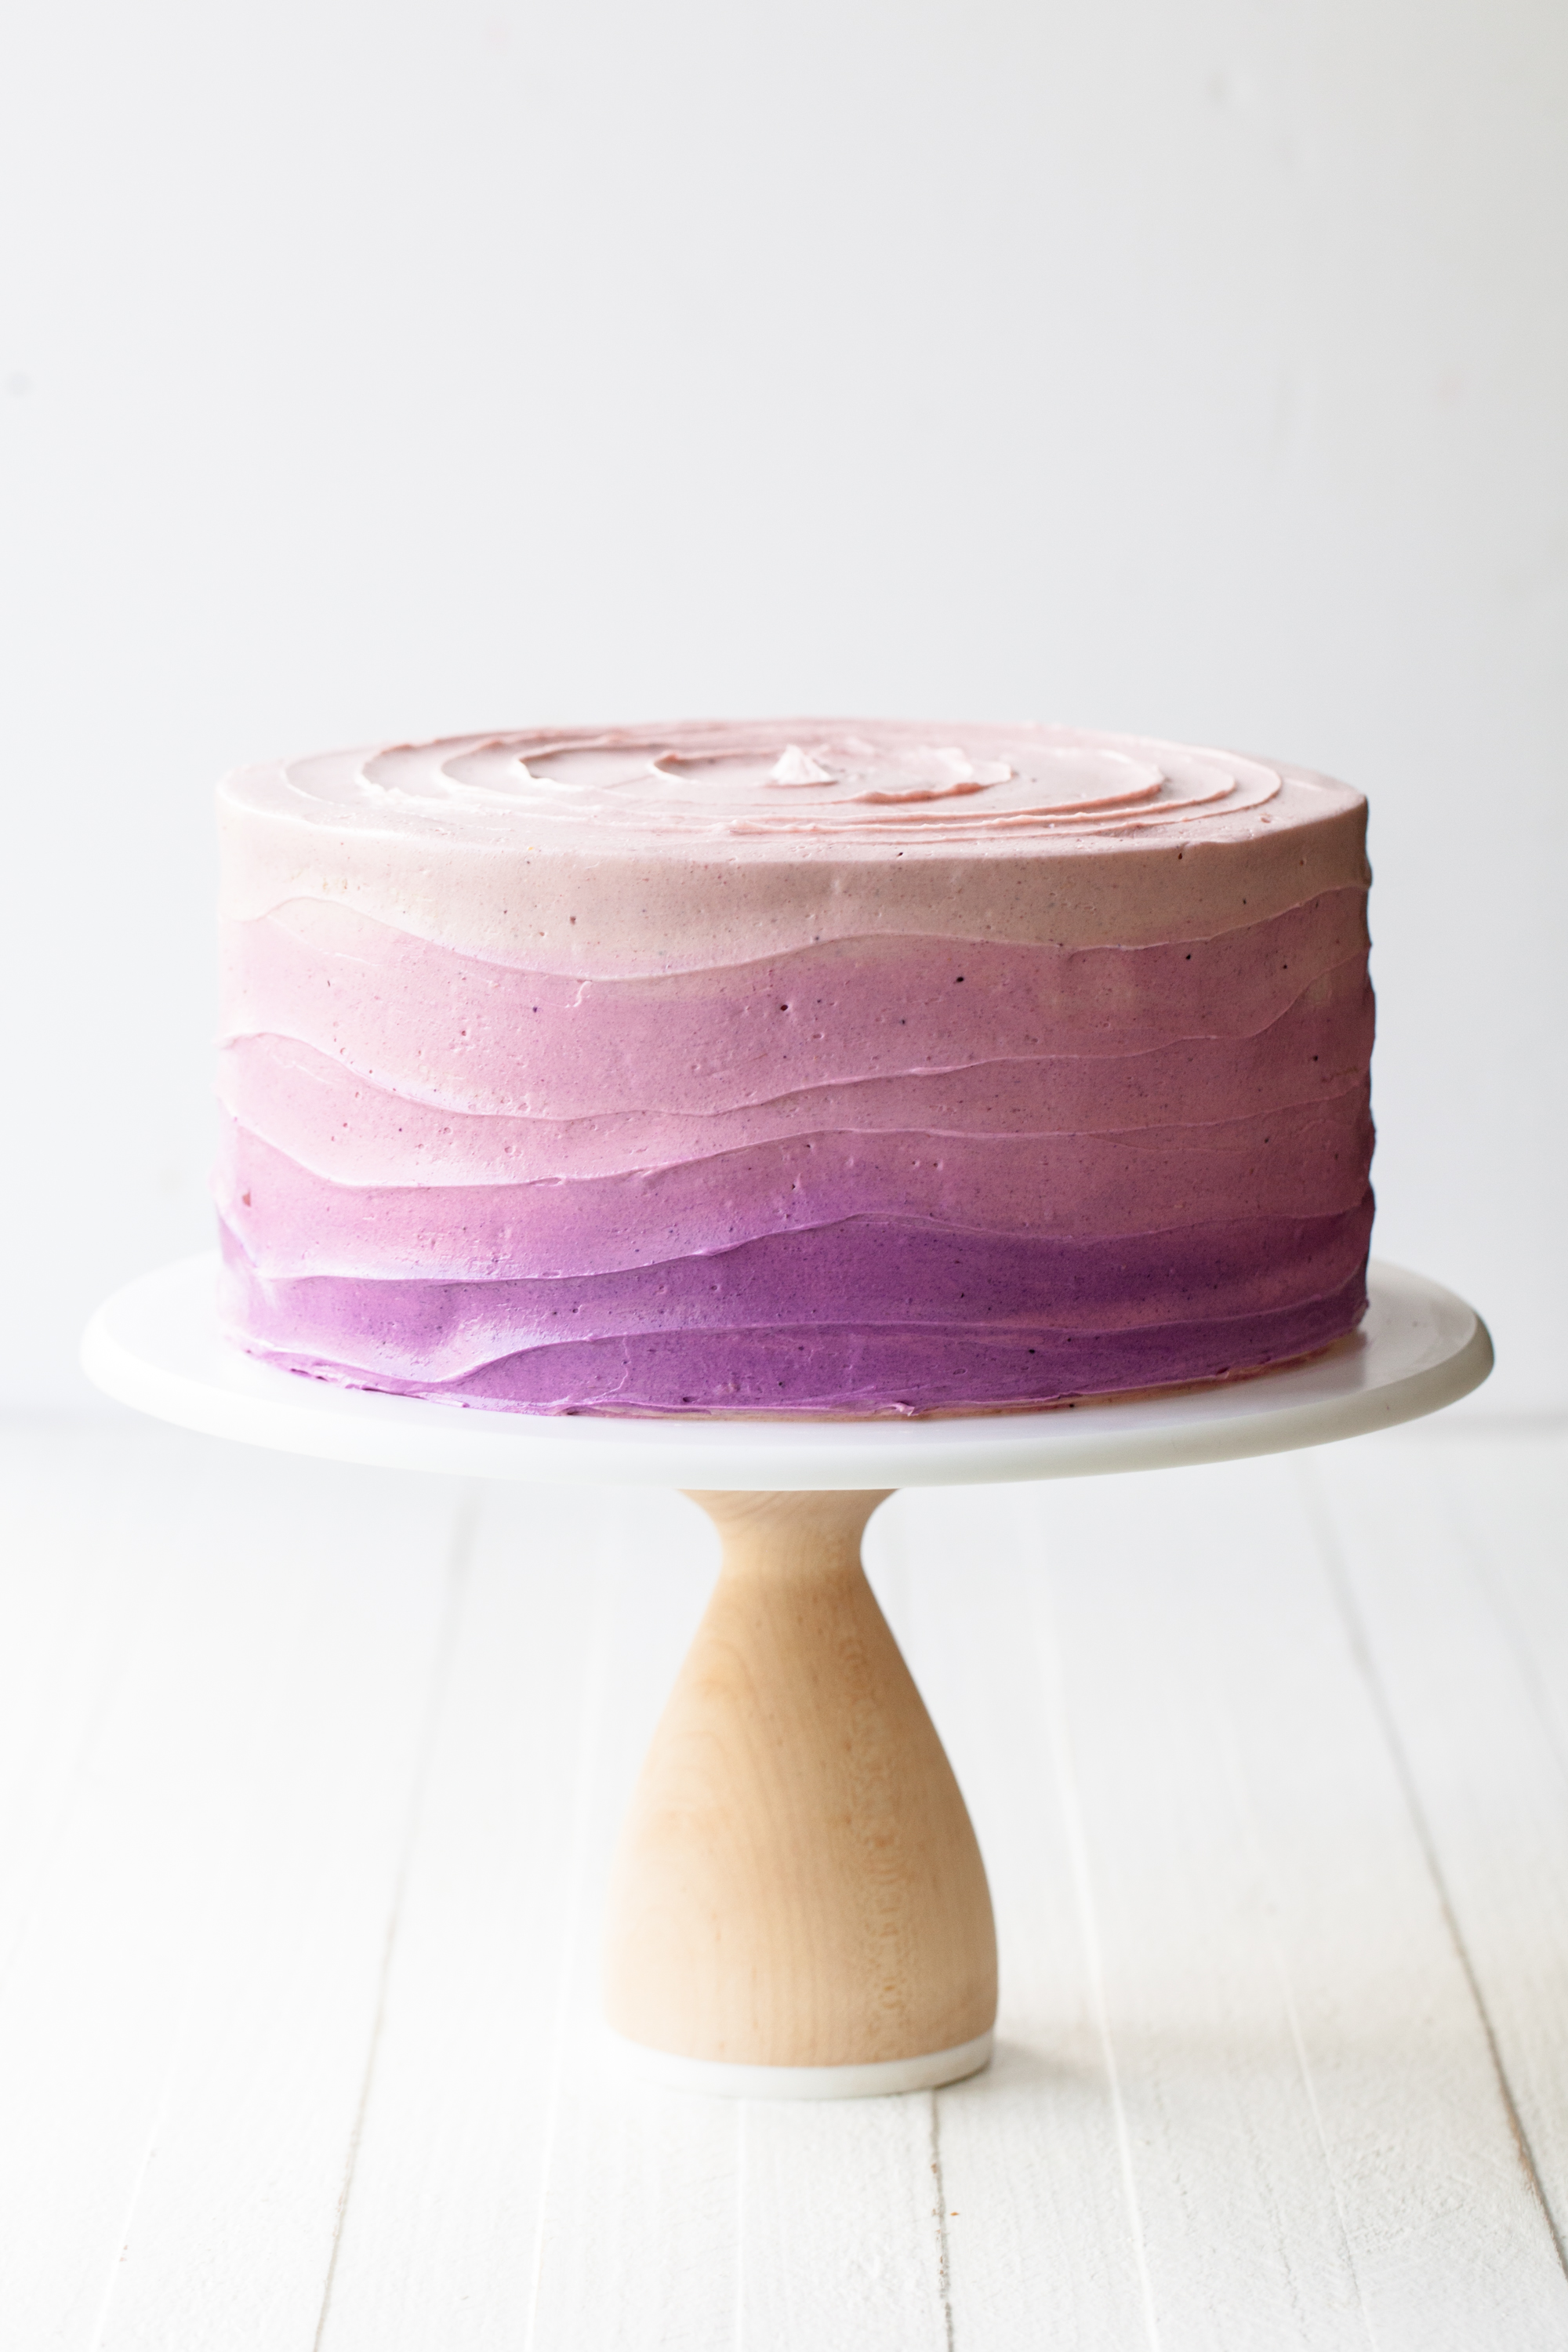 Blueberry Layer Cake Recipe with ombré frosting